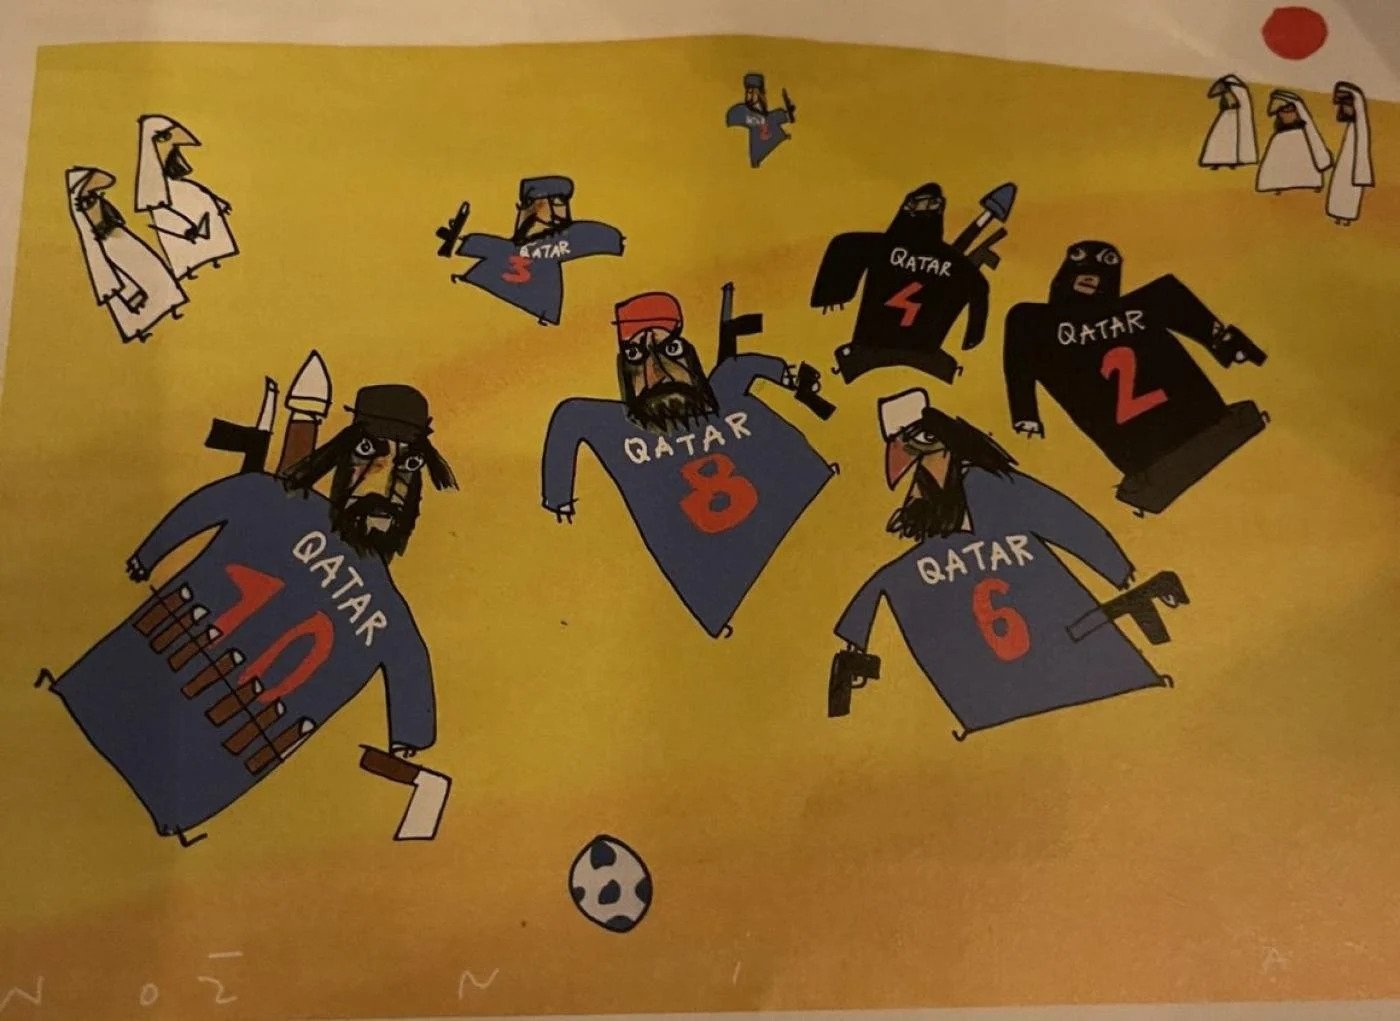 A controversial French caricature depicts Qatari players holding weapons ahead of the Qatar World Cup. (Twitter Photo)